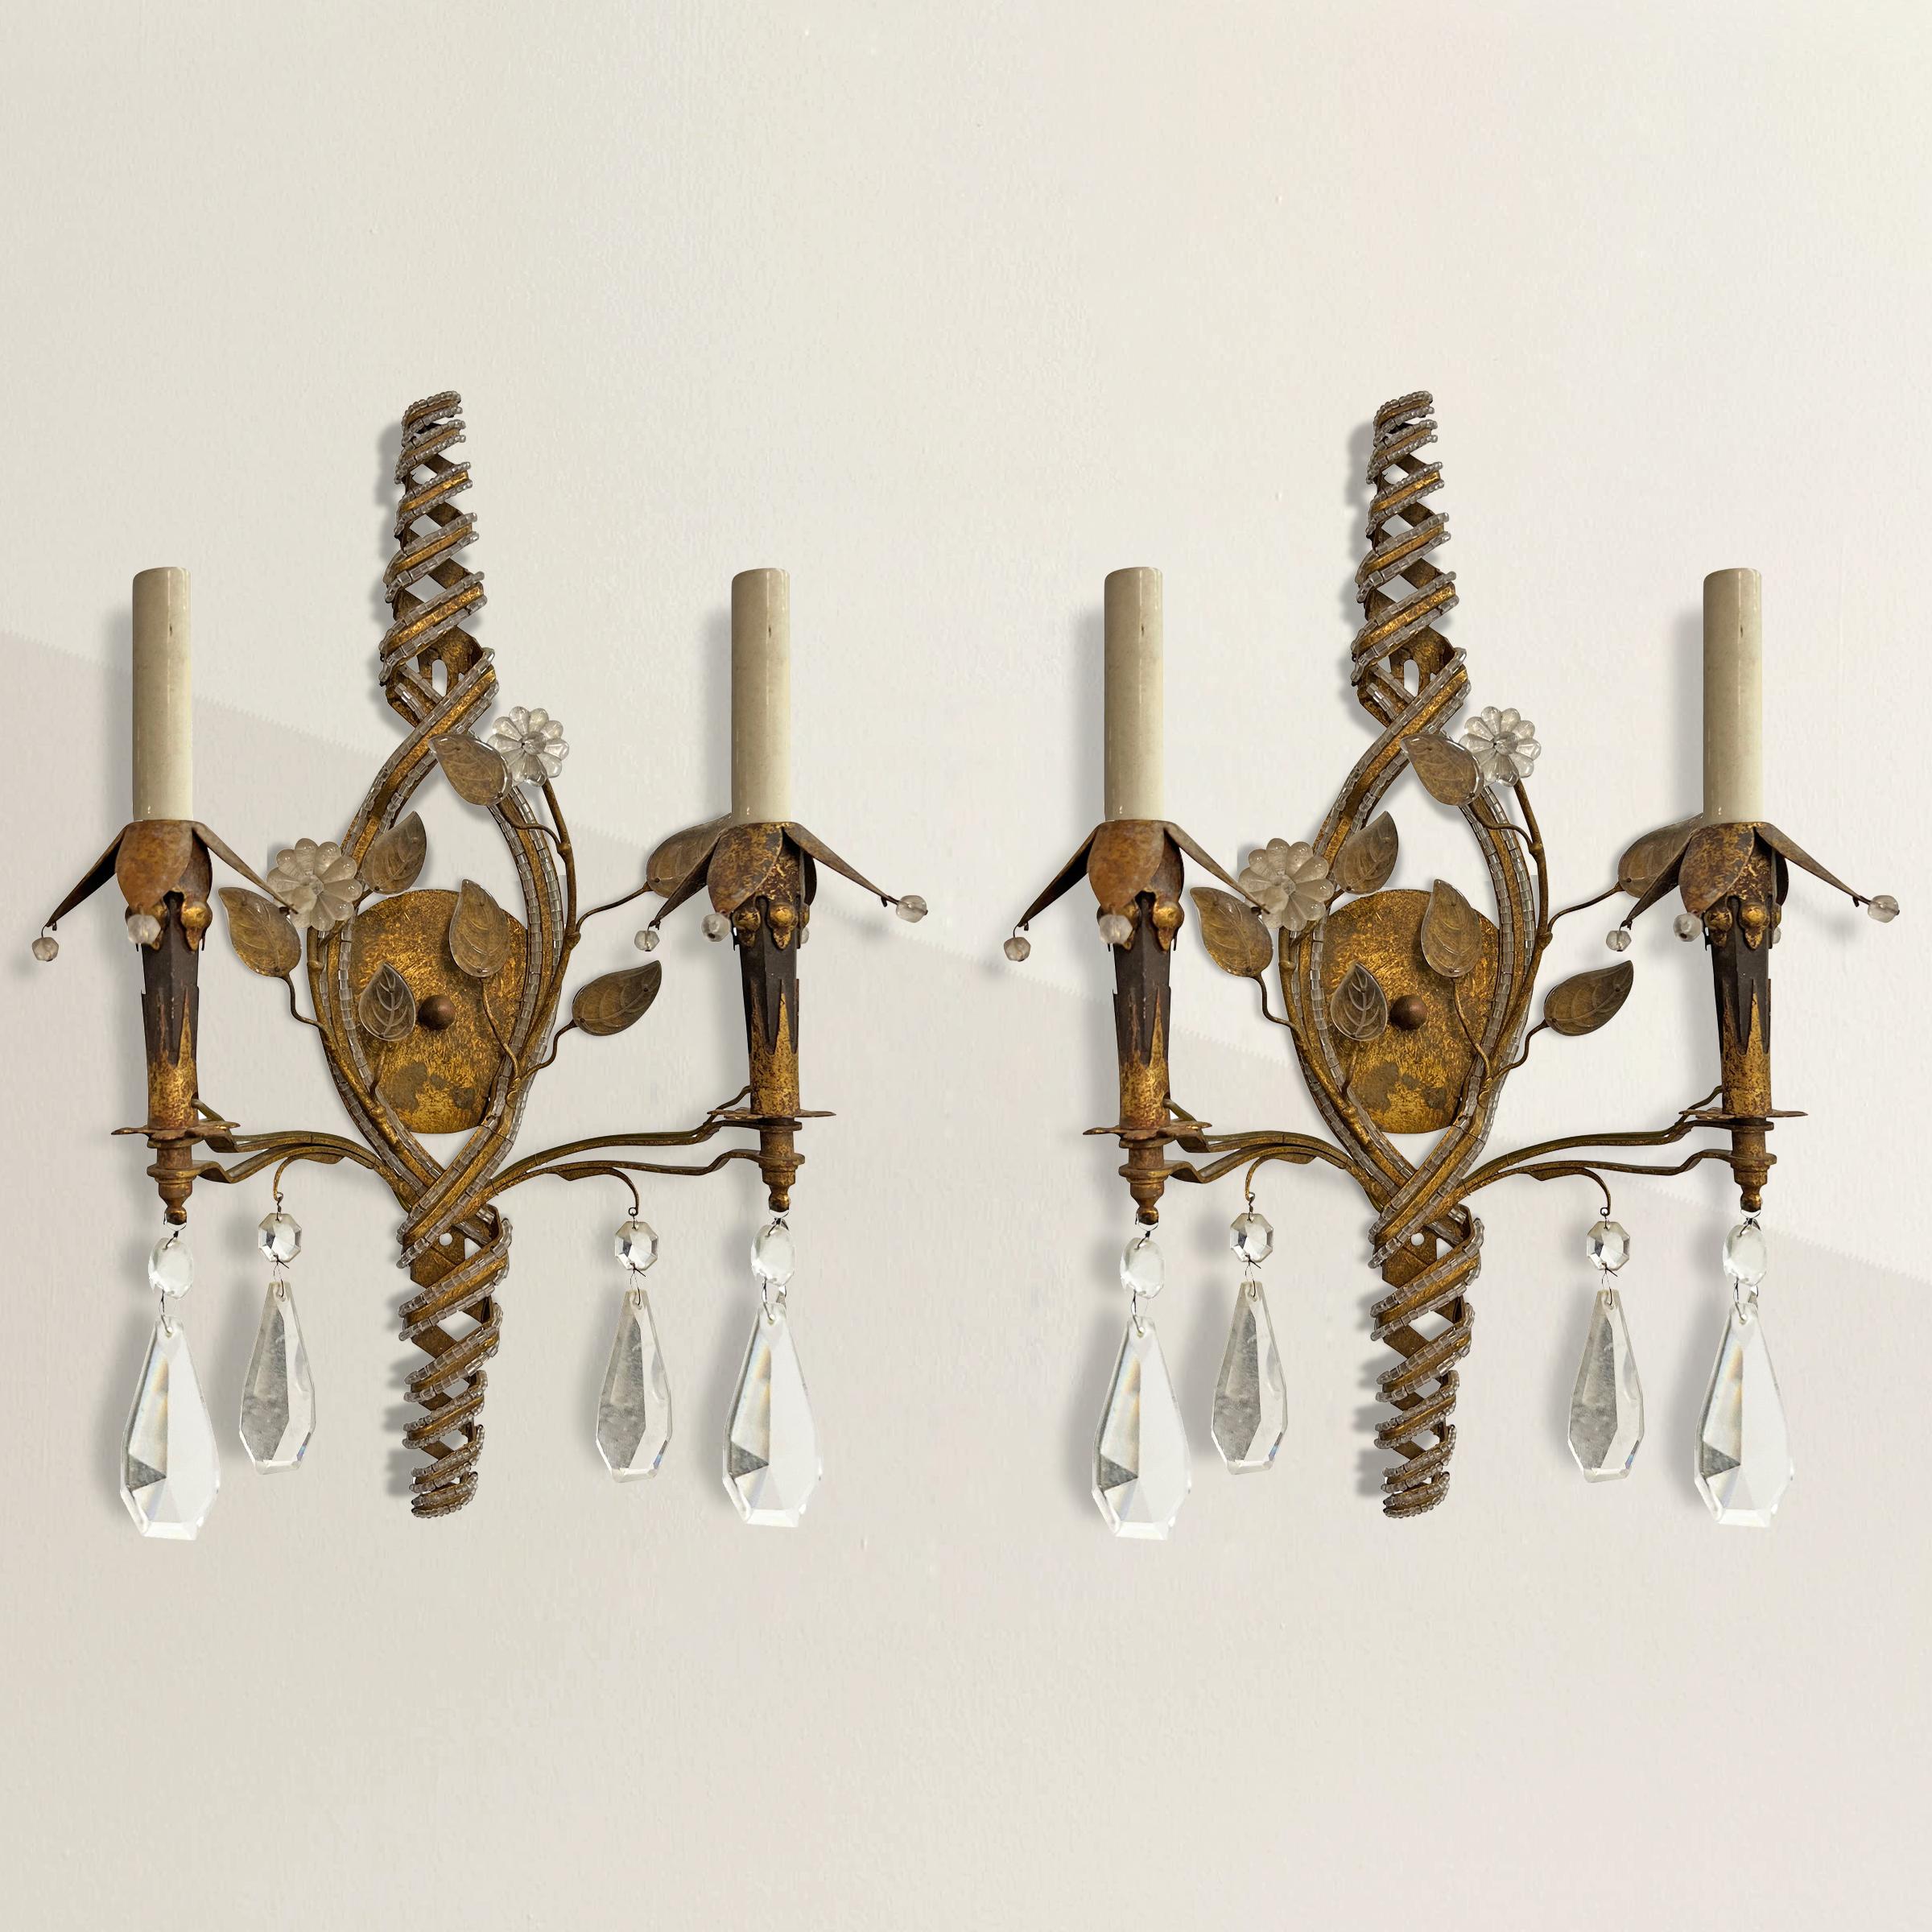 Immerse your space in the timeless elegance of vintage French design with this exquisite pair of Maison Baguès two-arm sconces. Crafted by the renowned Maison Baguès, a bastion of luxury lighting and furniture since 1840, these sconces are a